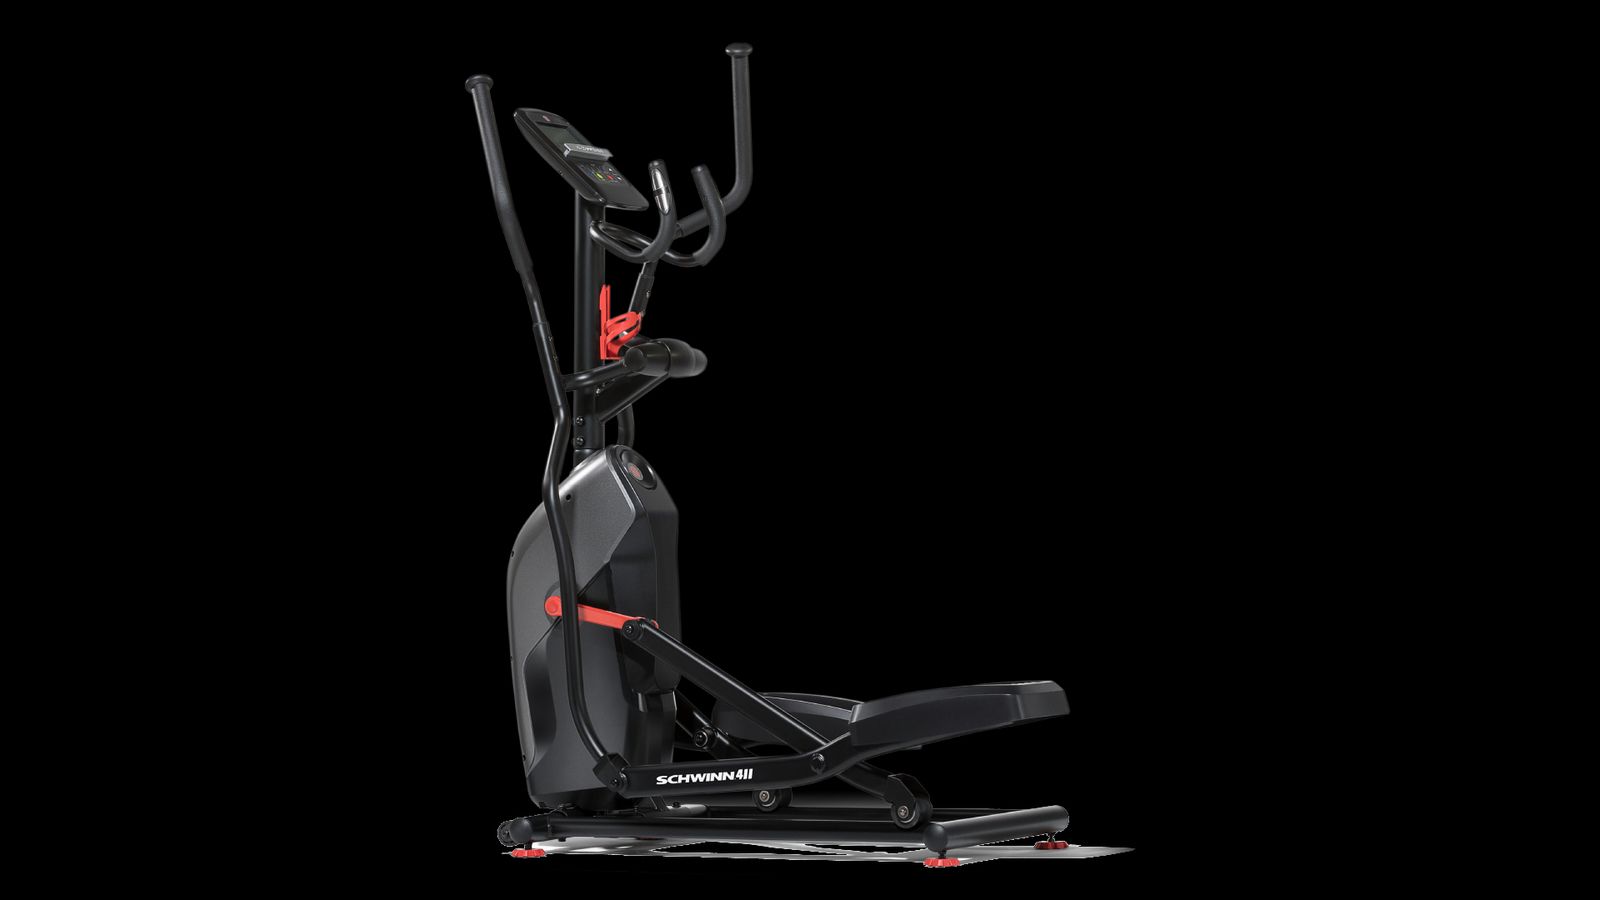 Schwinn Fitness 411 product image of a black and red elliptical.